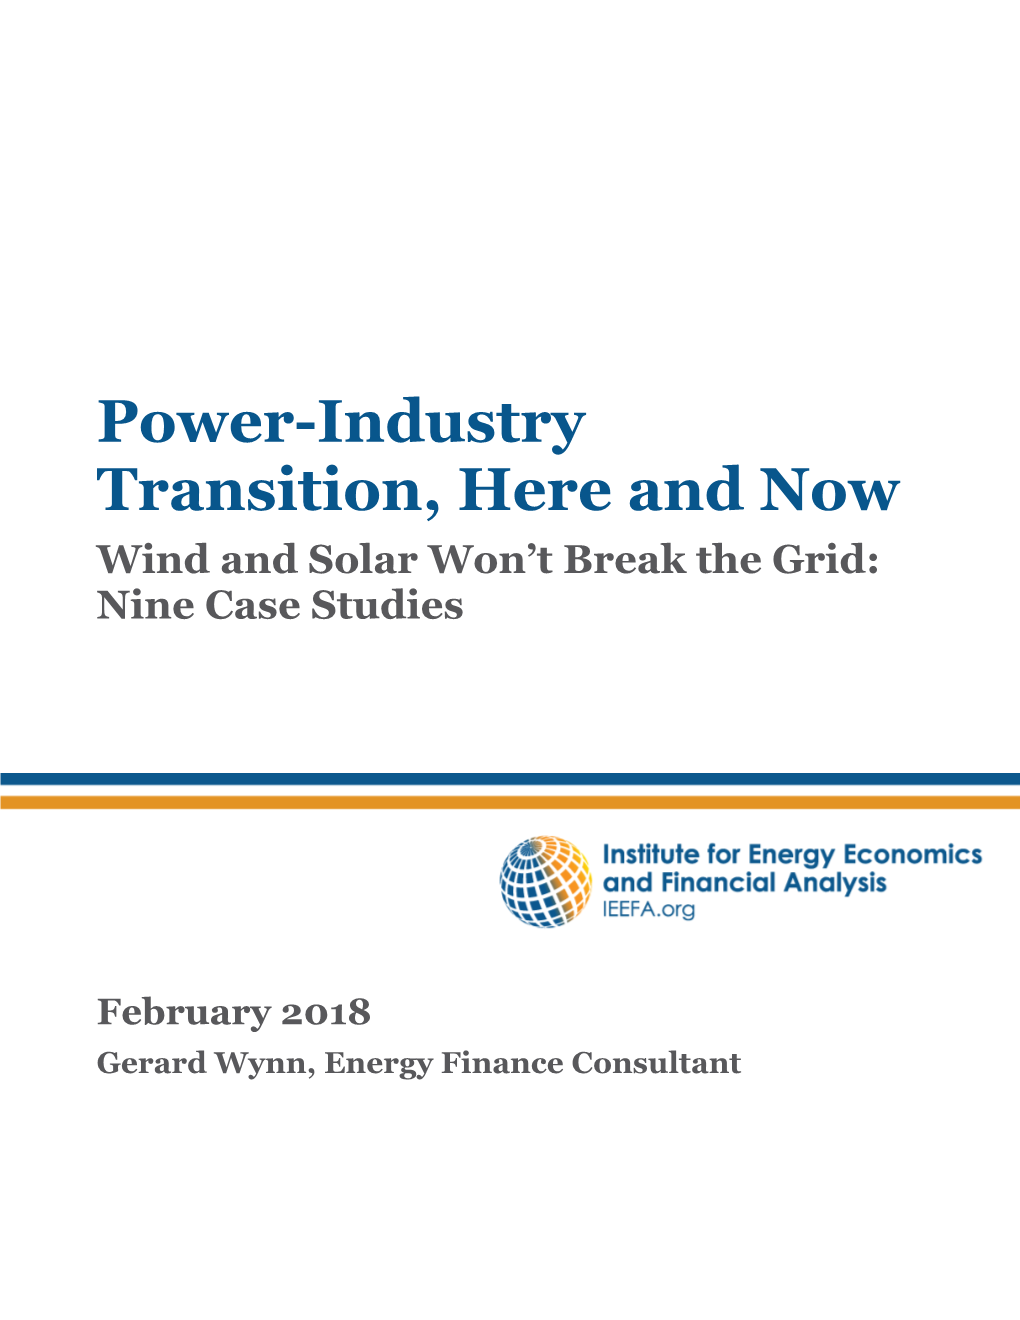 Power-Industry Transition, Here and Now Wind and Solar Won’T Break the Grid